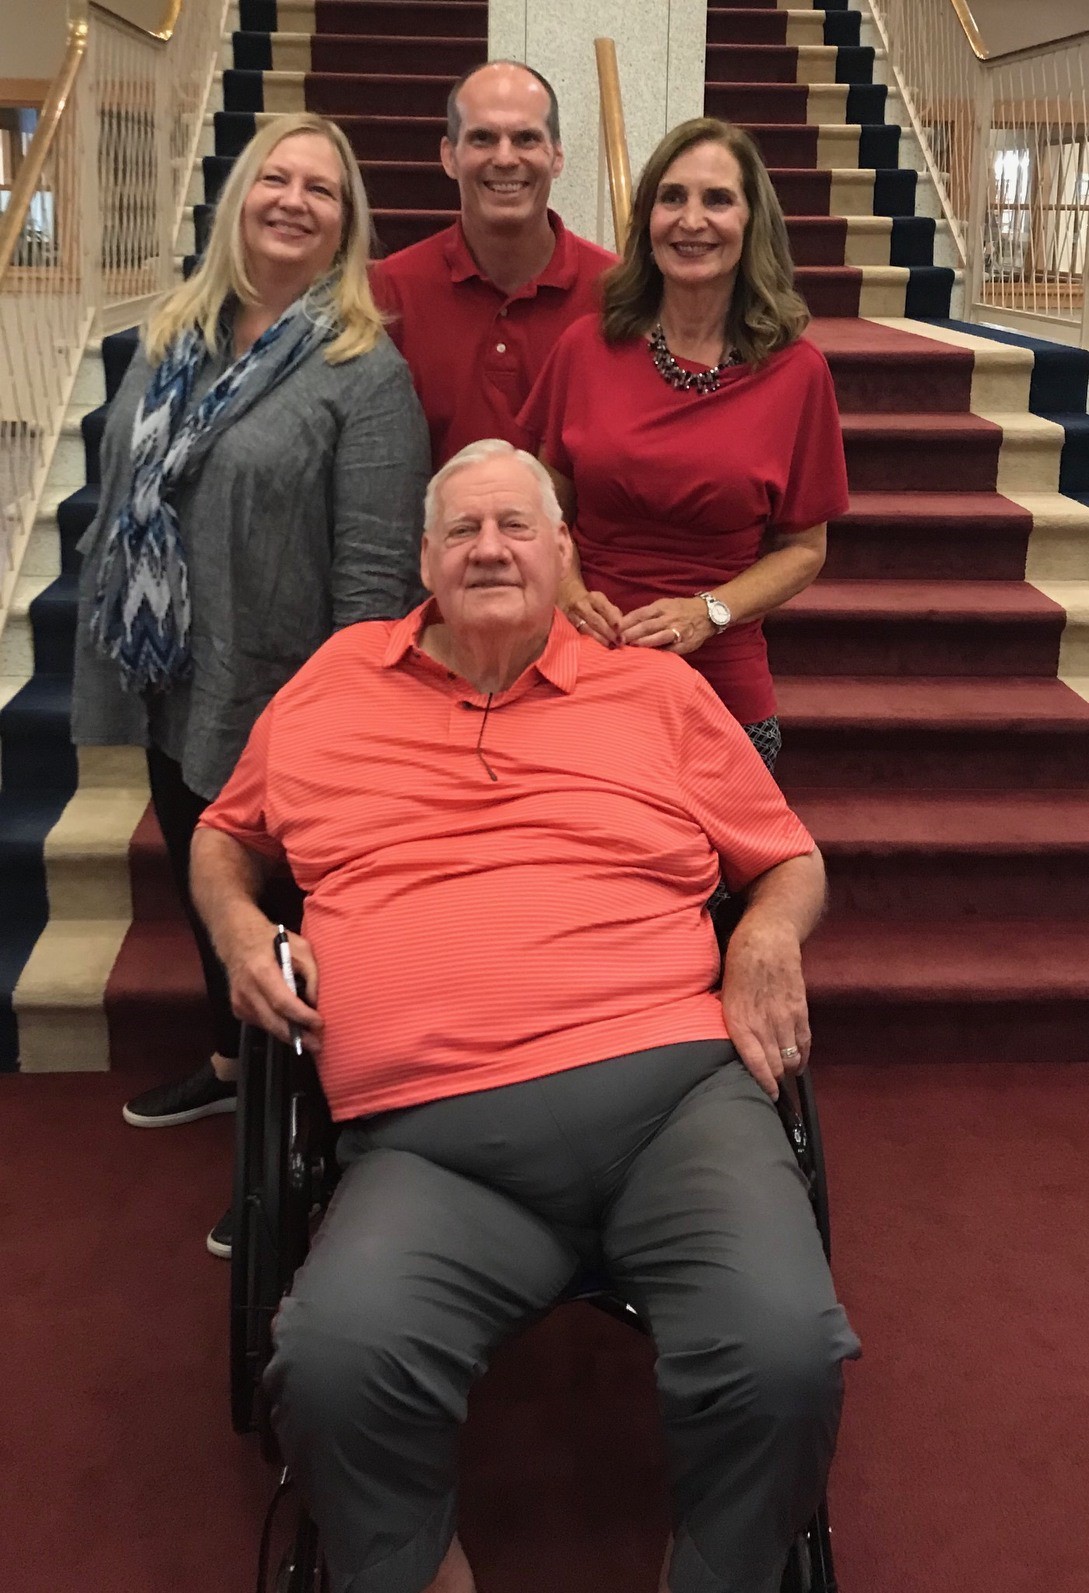 Alisa, Tina, and Tim ’87 joined their dad at a book signing event on campus. With help from former Professor David Phillips, Max ’58 wrote “Some Little Giants,” a book detailing the history of Wabash College athletics from its start in 1865 through the 2017 season.